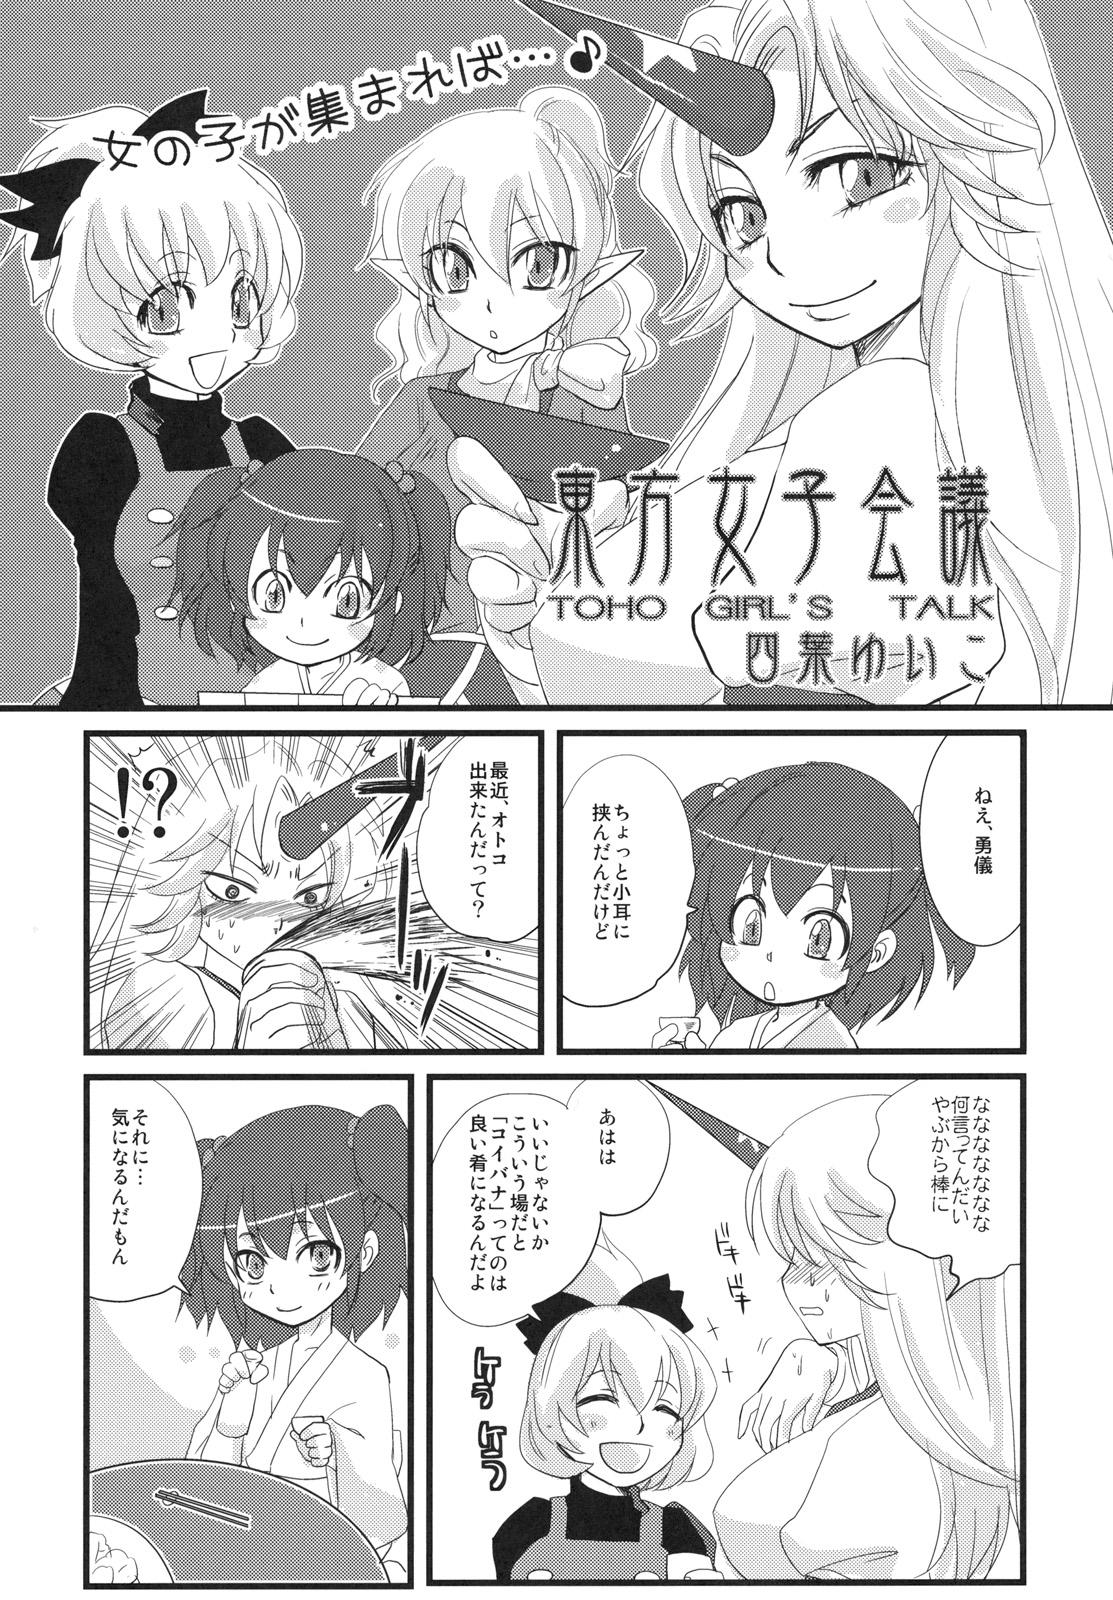 Eating Touhou Under the Shrine - Touhou project Porno - Page 5